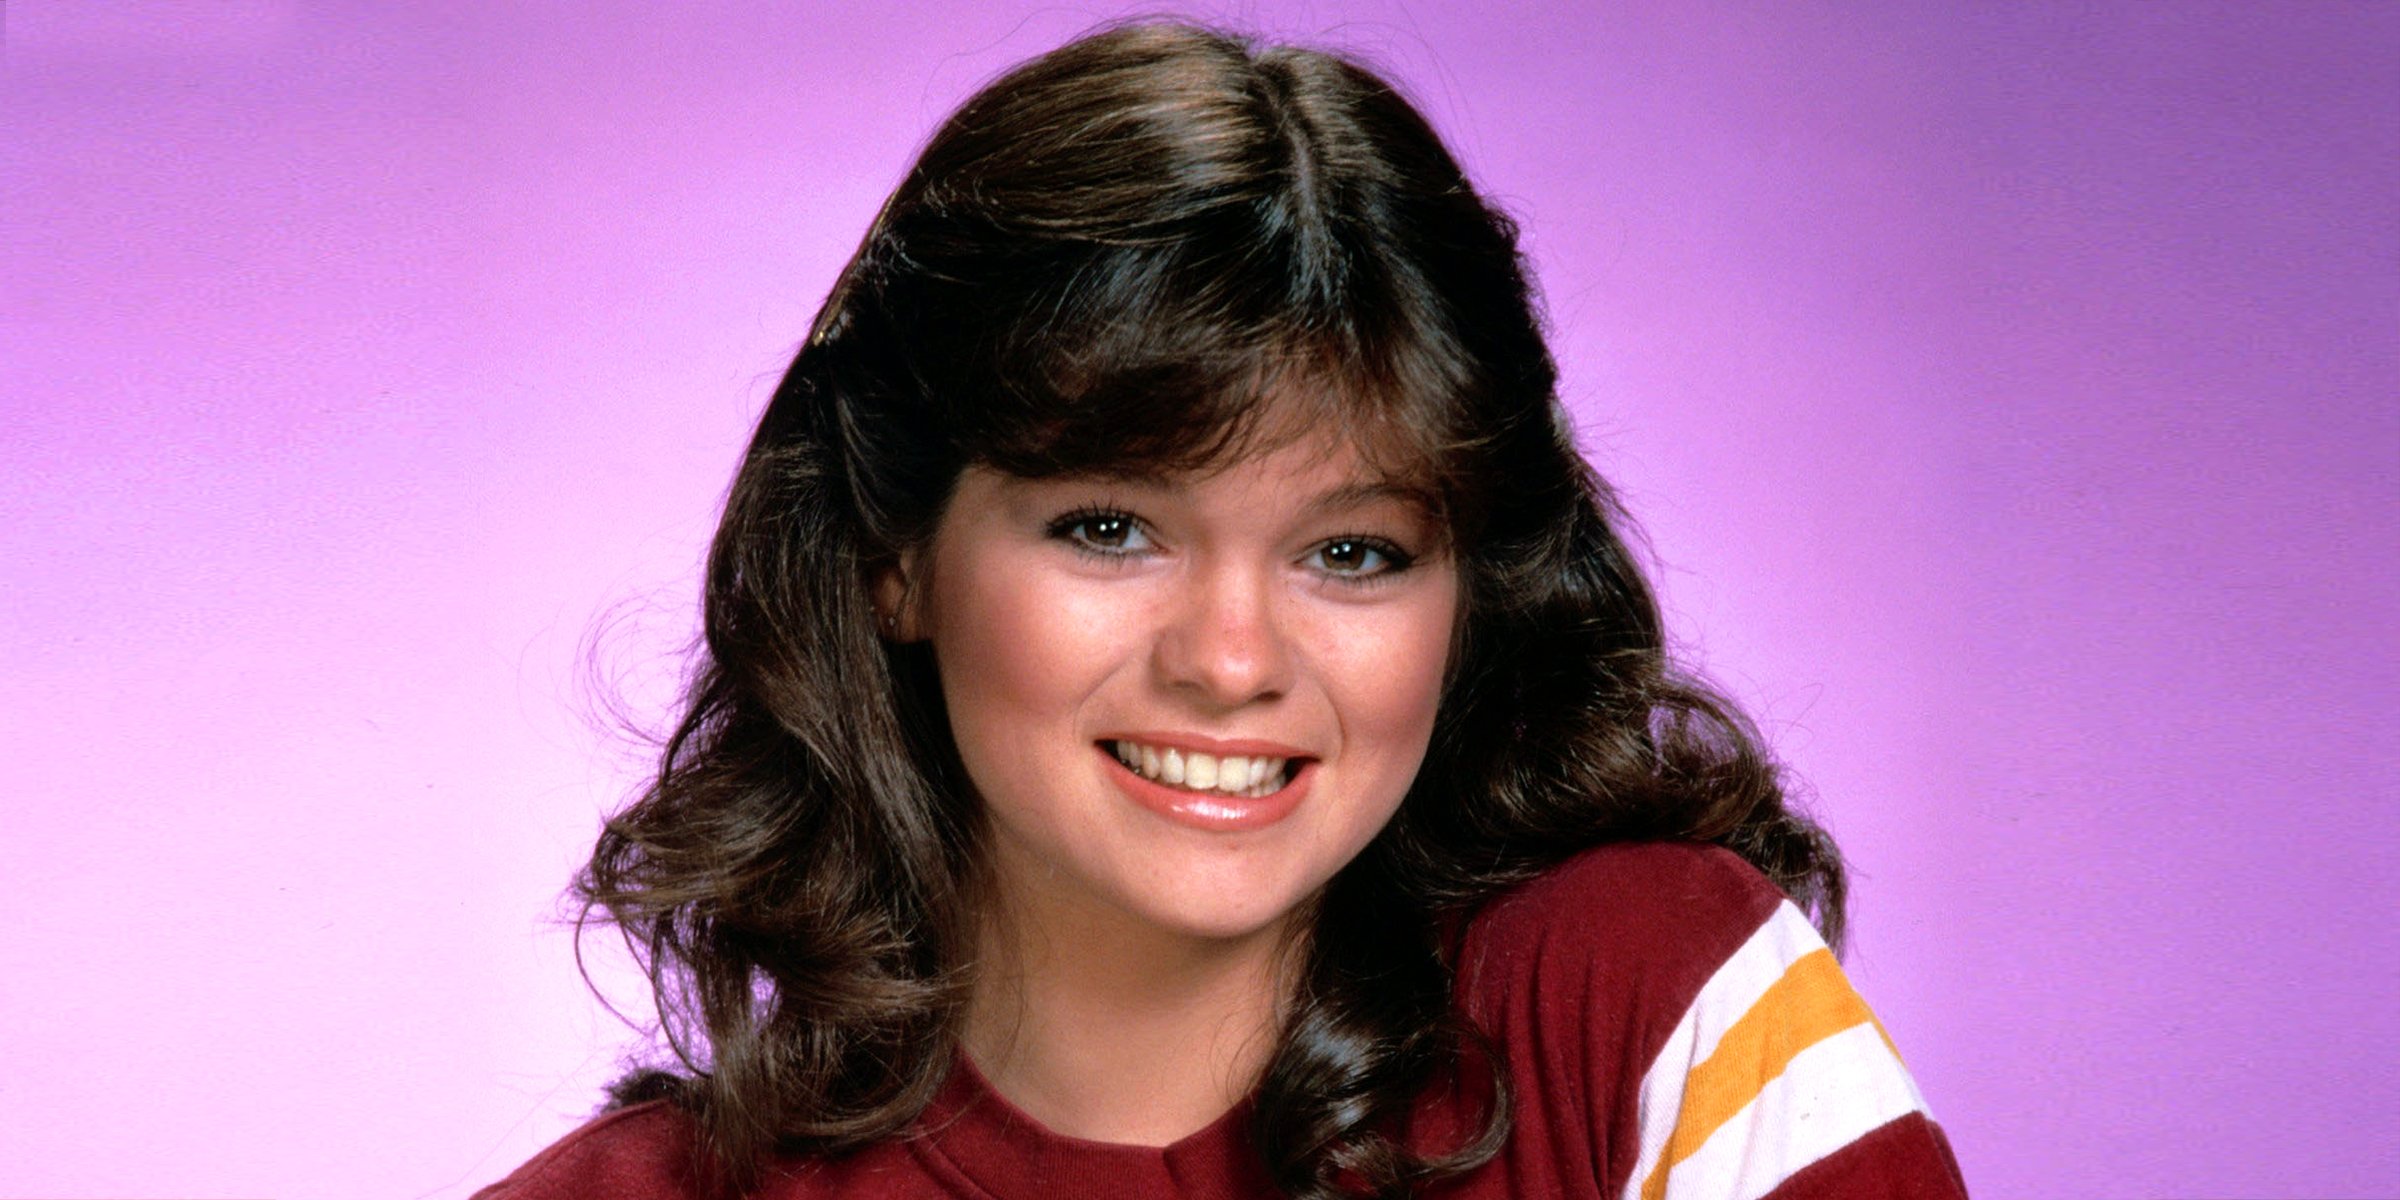 Valerie Bertinelli, 1983 | Source: Getty Images